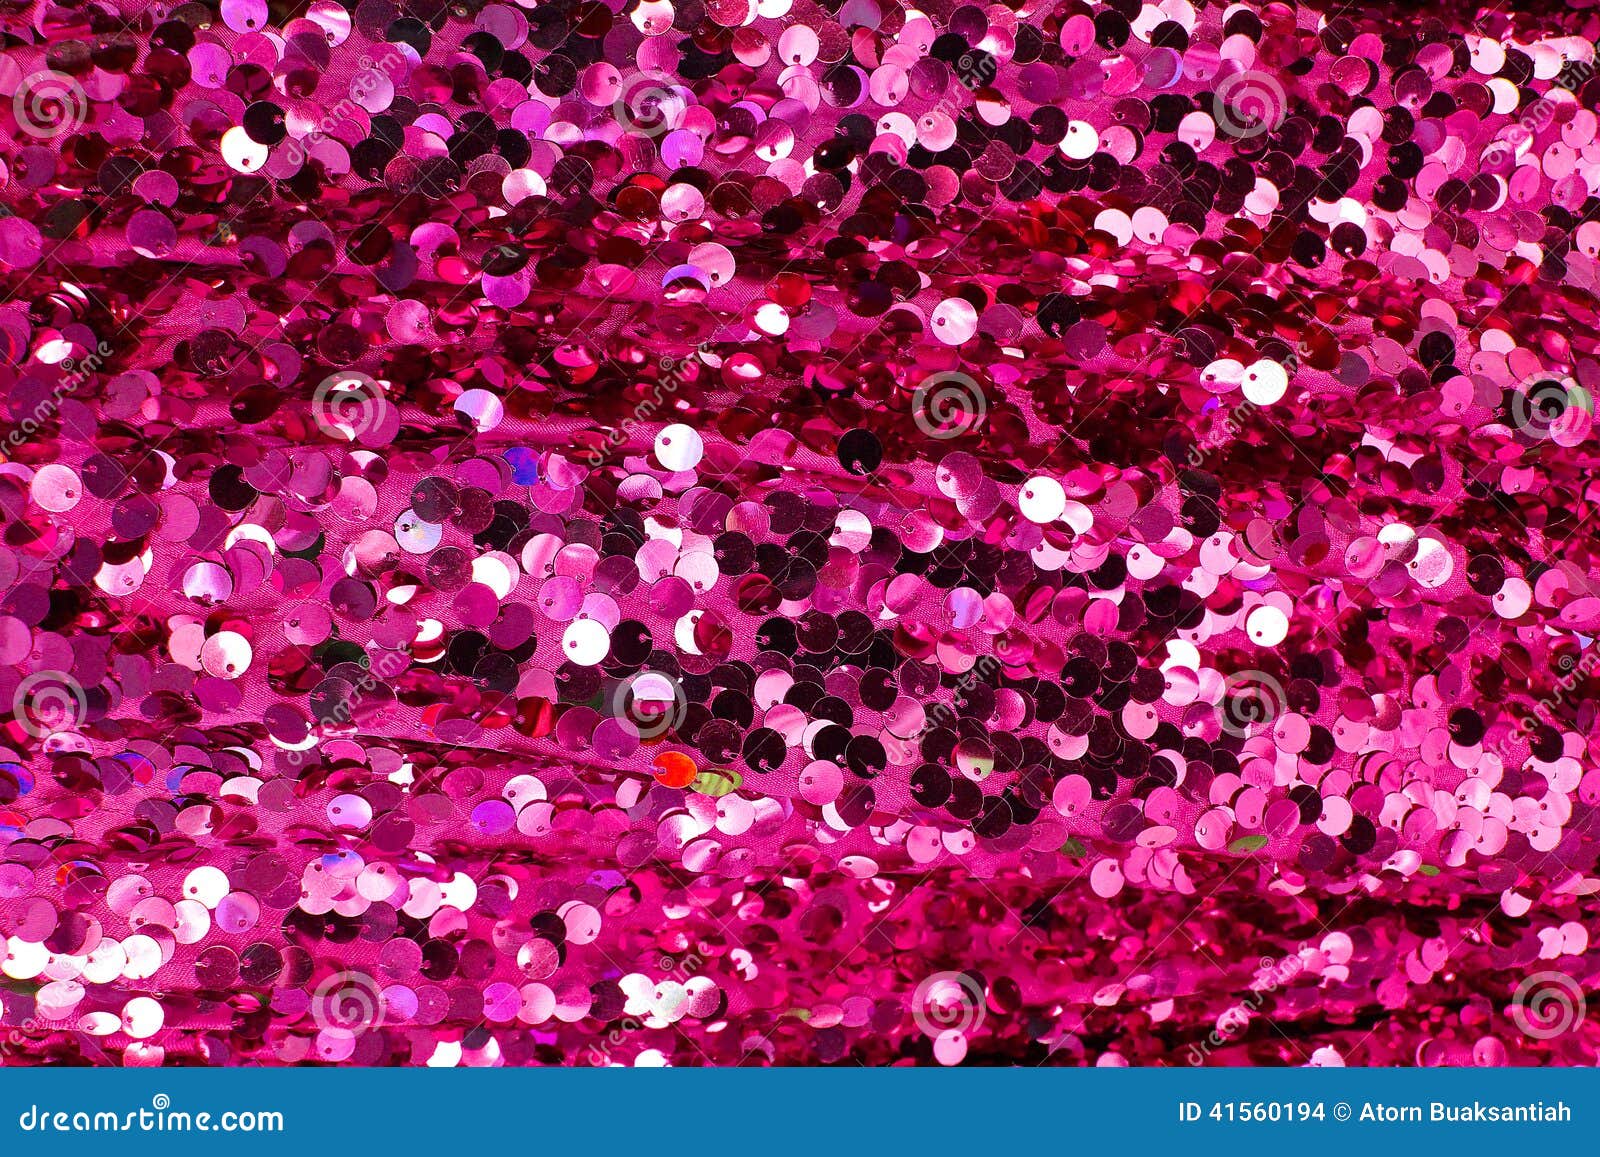 magic backgrounds tumblr Image:  Pink Photo 41560194 Glitter Background Stock  Texture